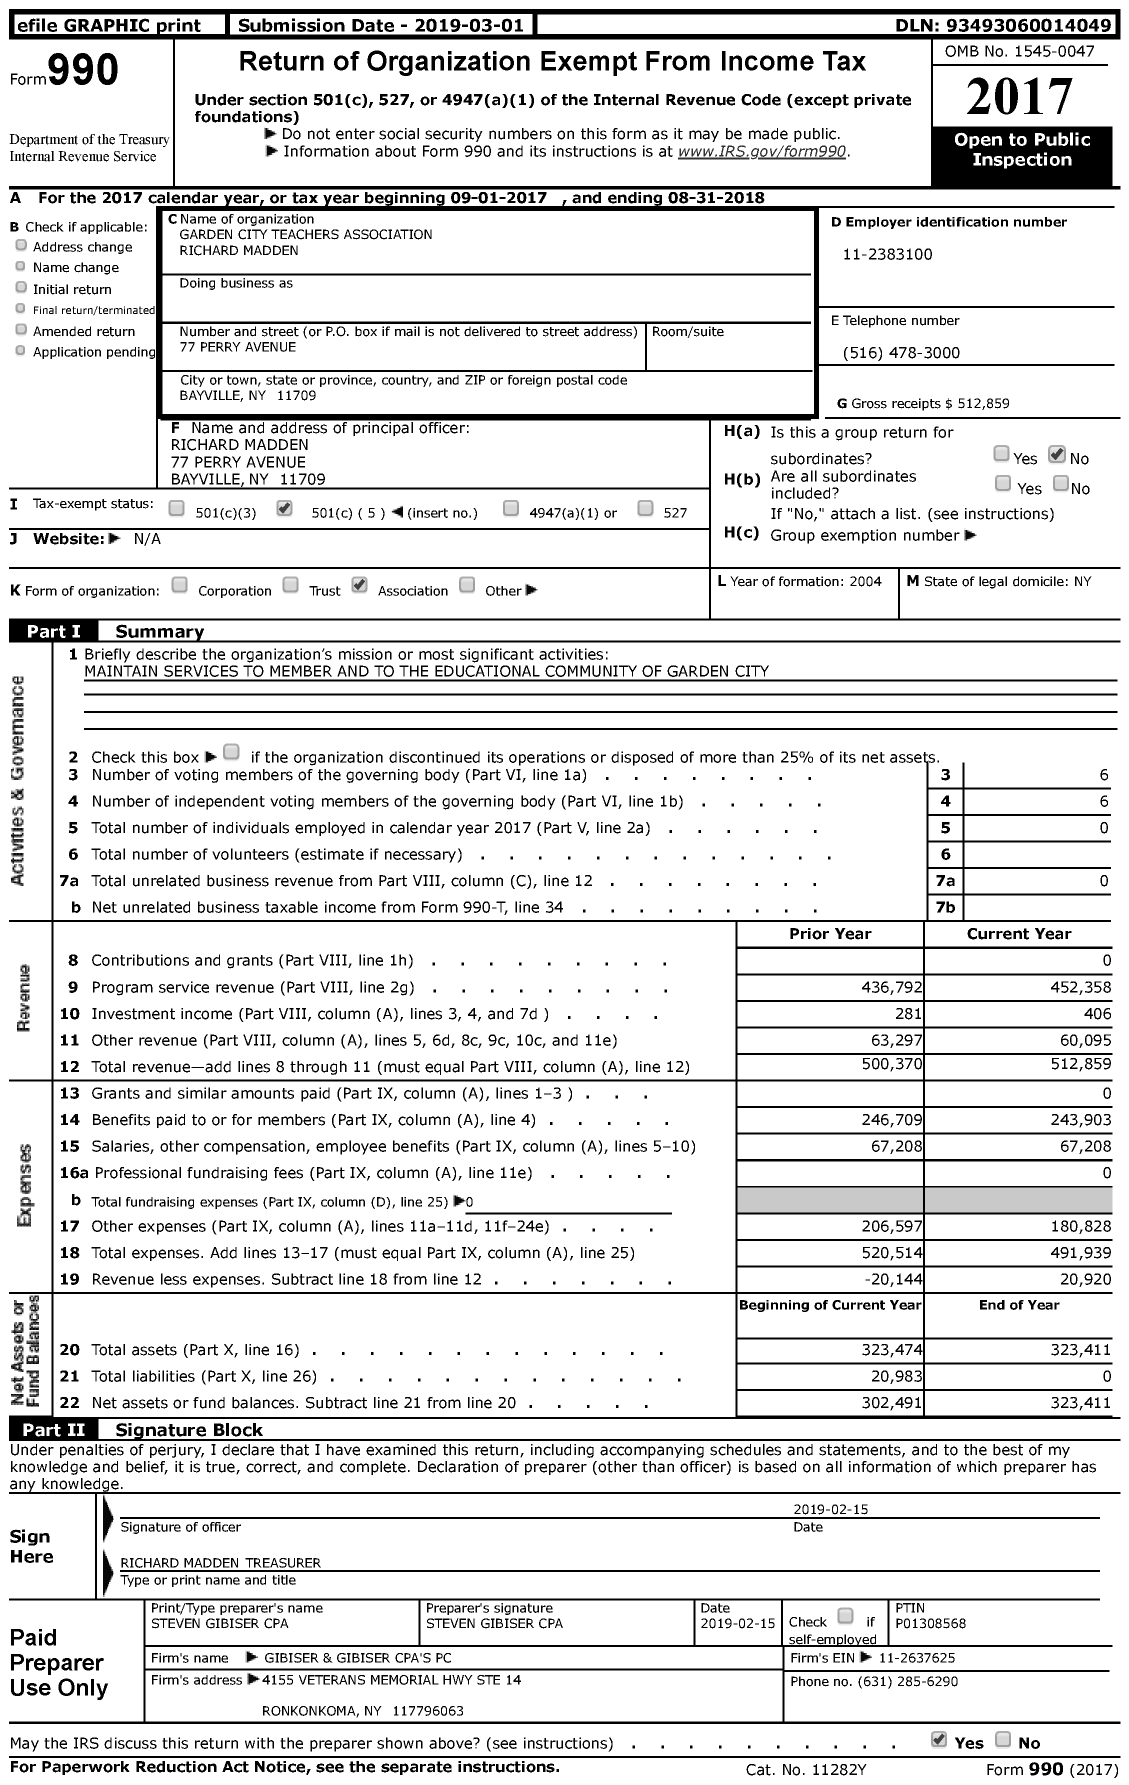 Image of first page of 2017 Form 990 for American Federation of Teachers - 2666 Garden City Teachers Assoc